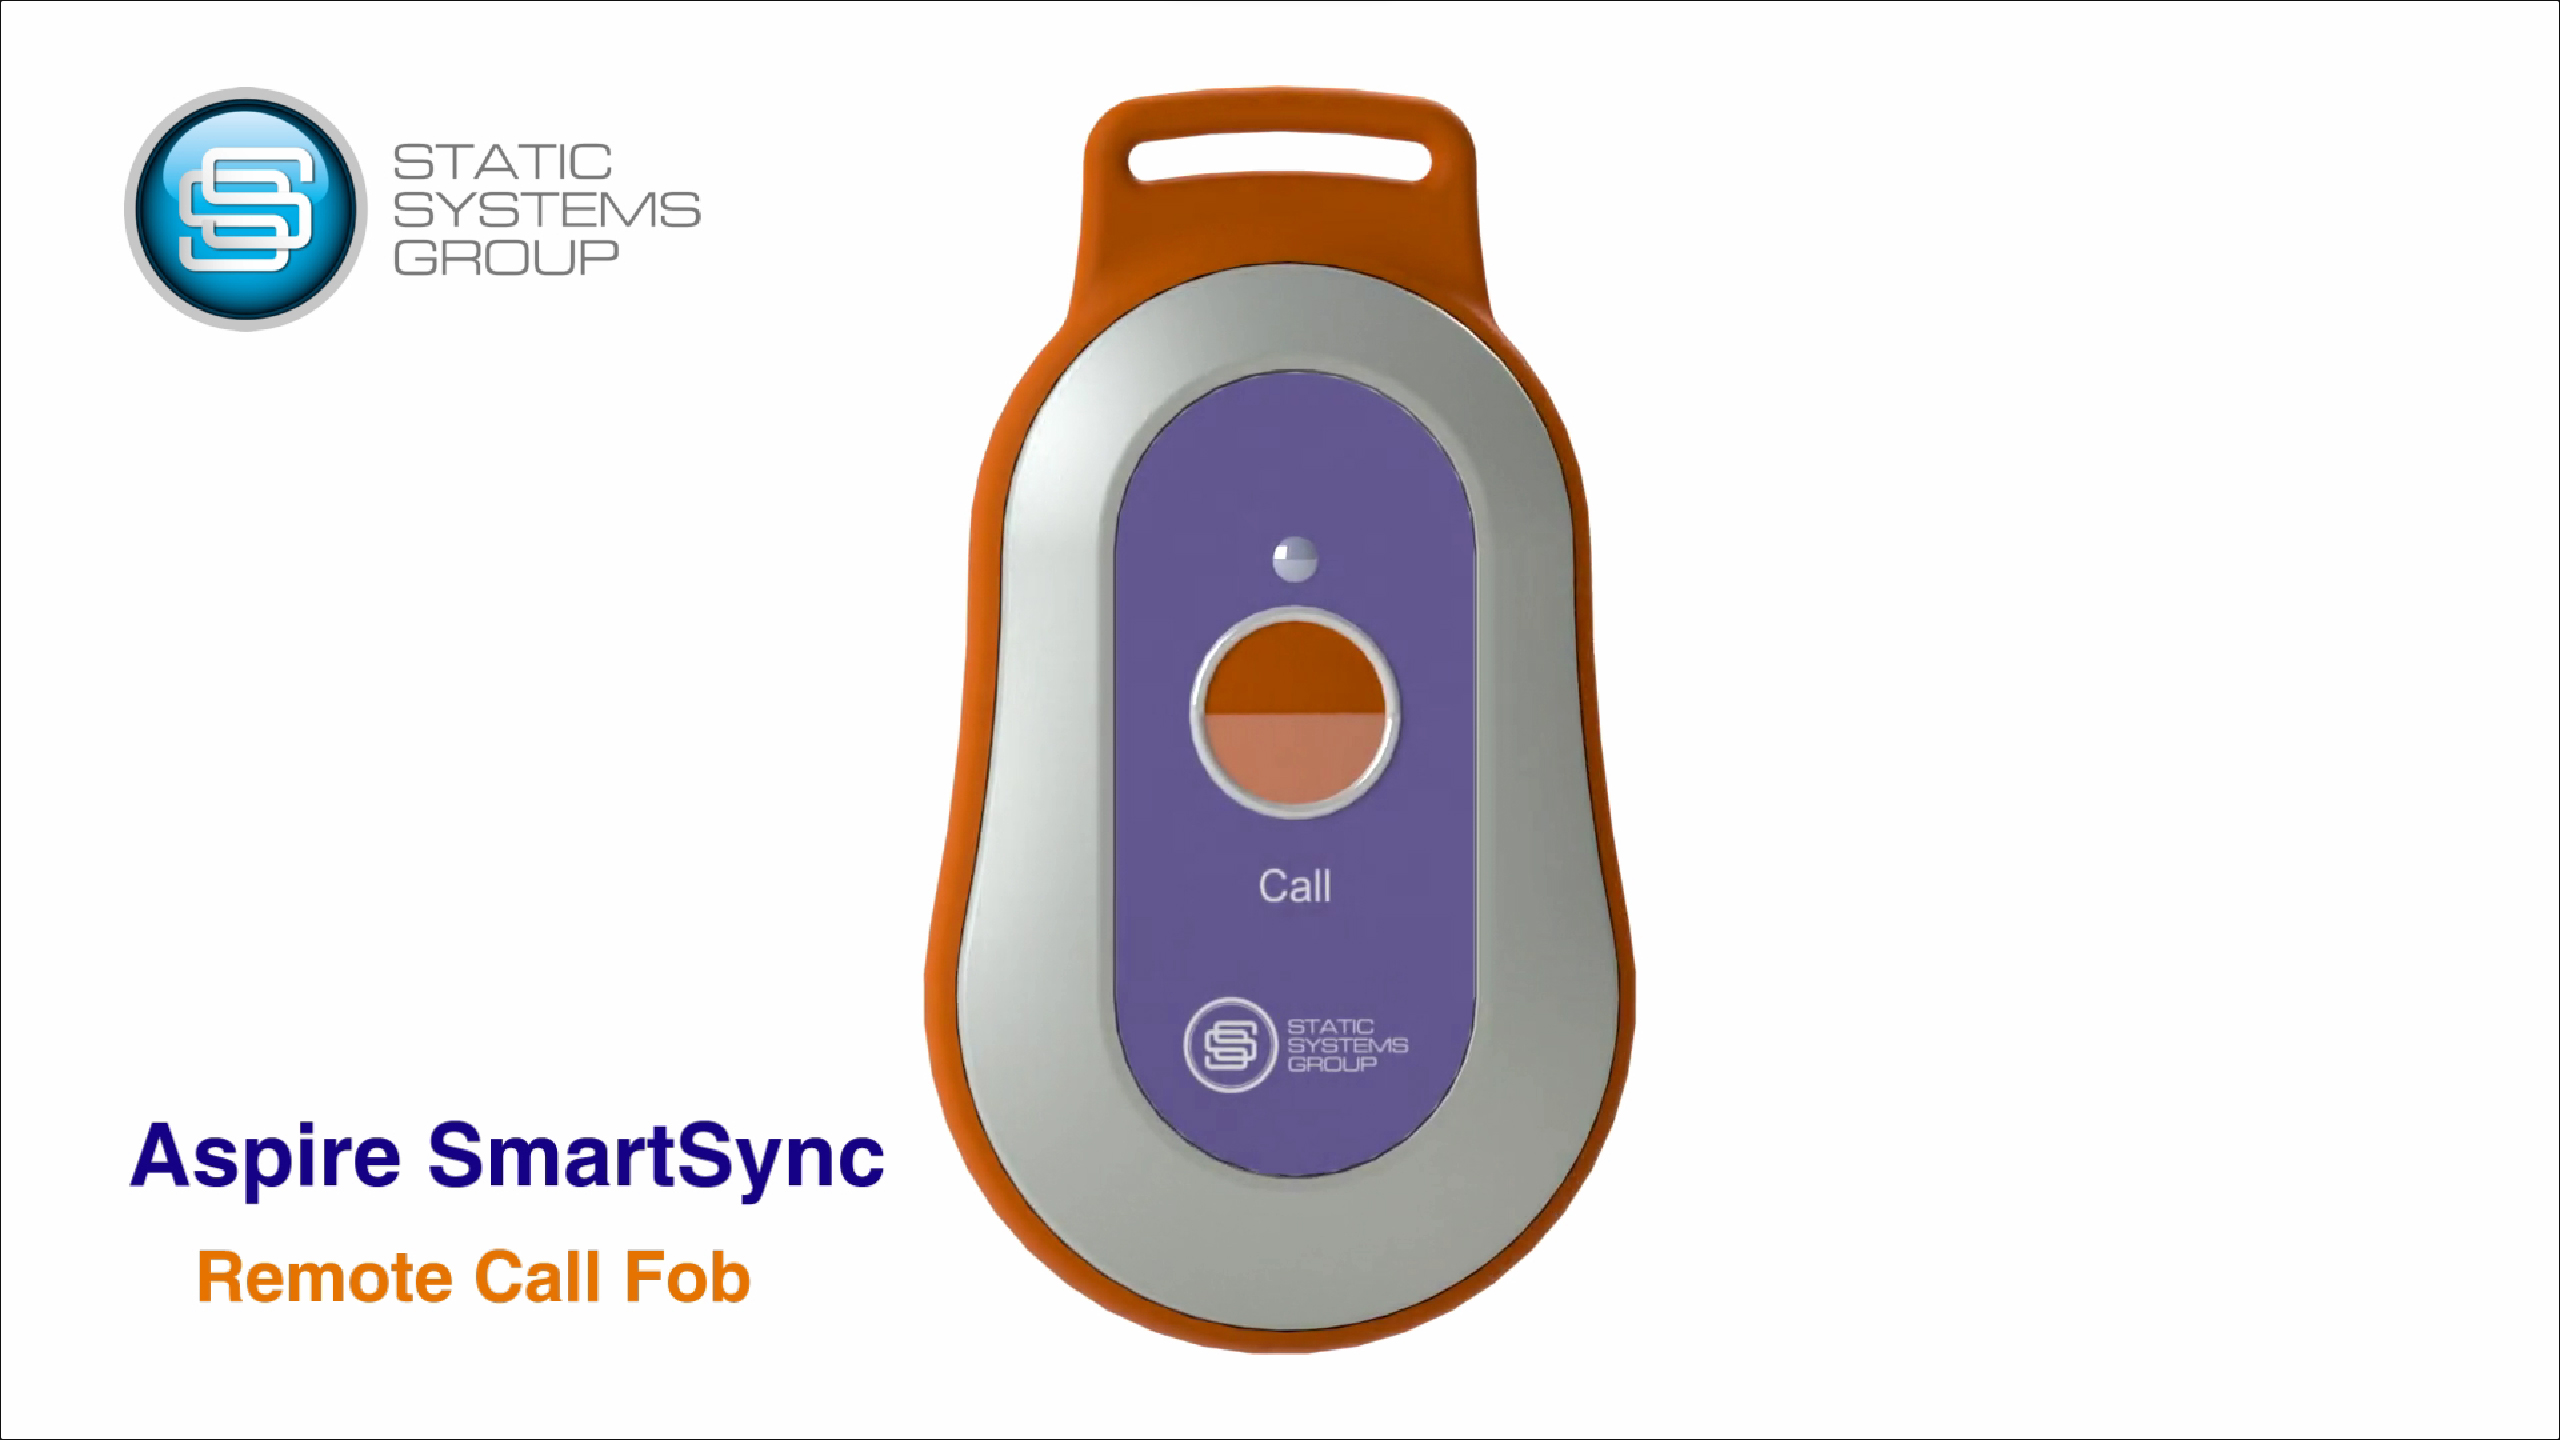 New wireless nurse call fob offers improved safety for out-of-bed patients